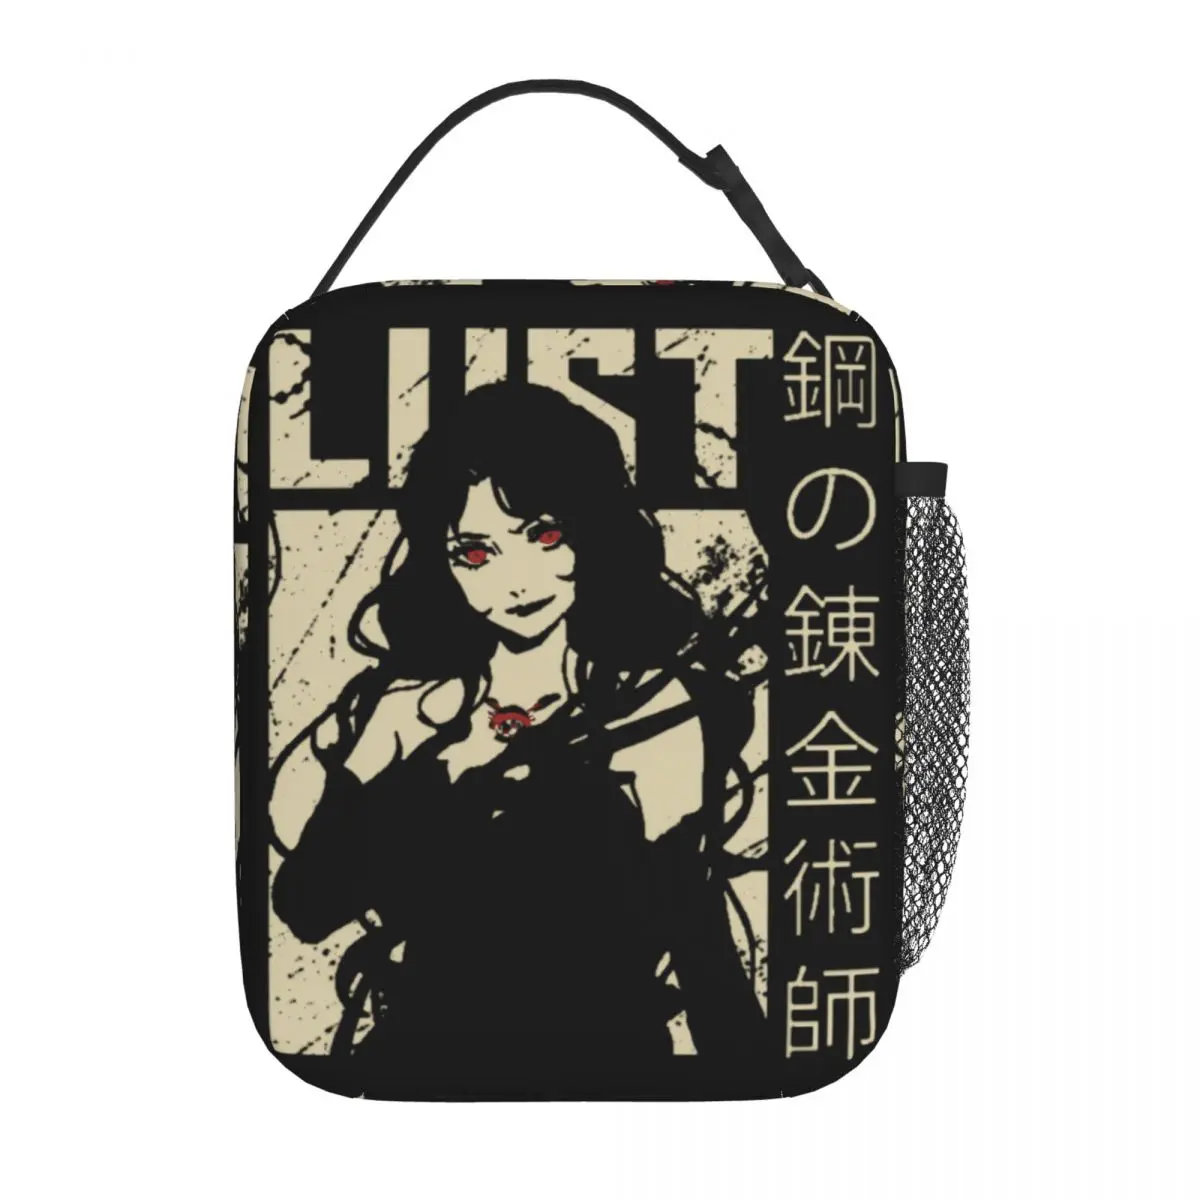 

Insulated Lunch Box Fullmetal Alchemist Lust Accessories Japanese Manga Storage Food Box Cooler Thermal Lunch Box For Office